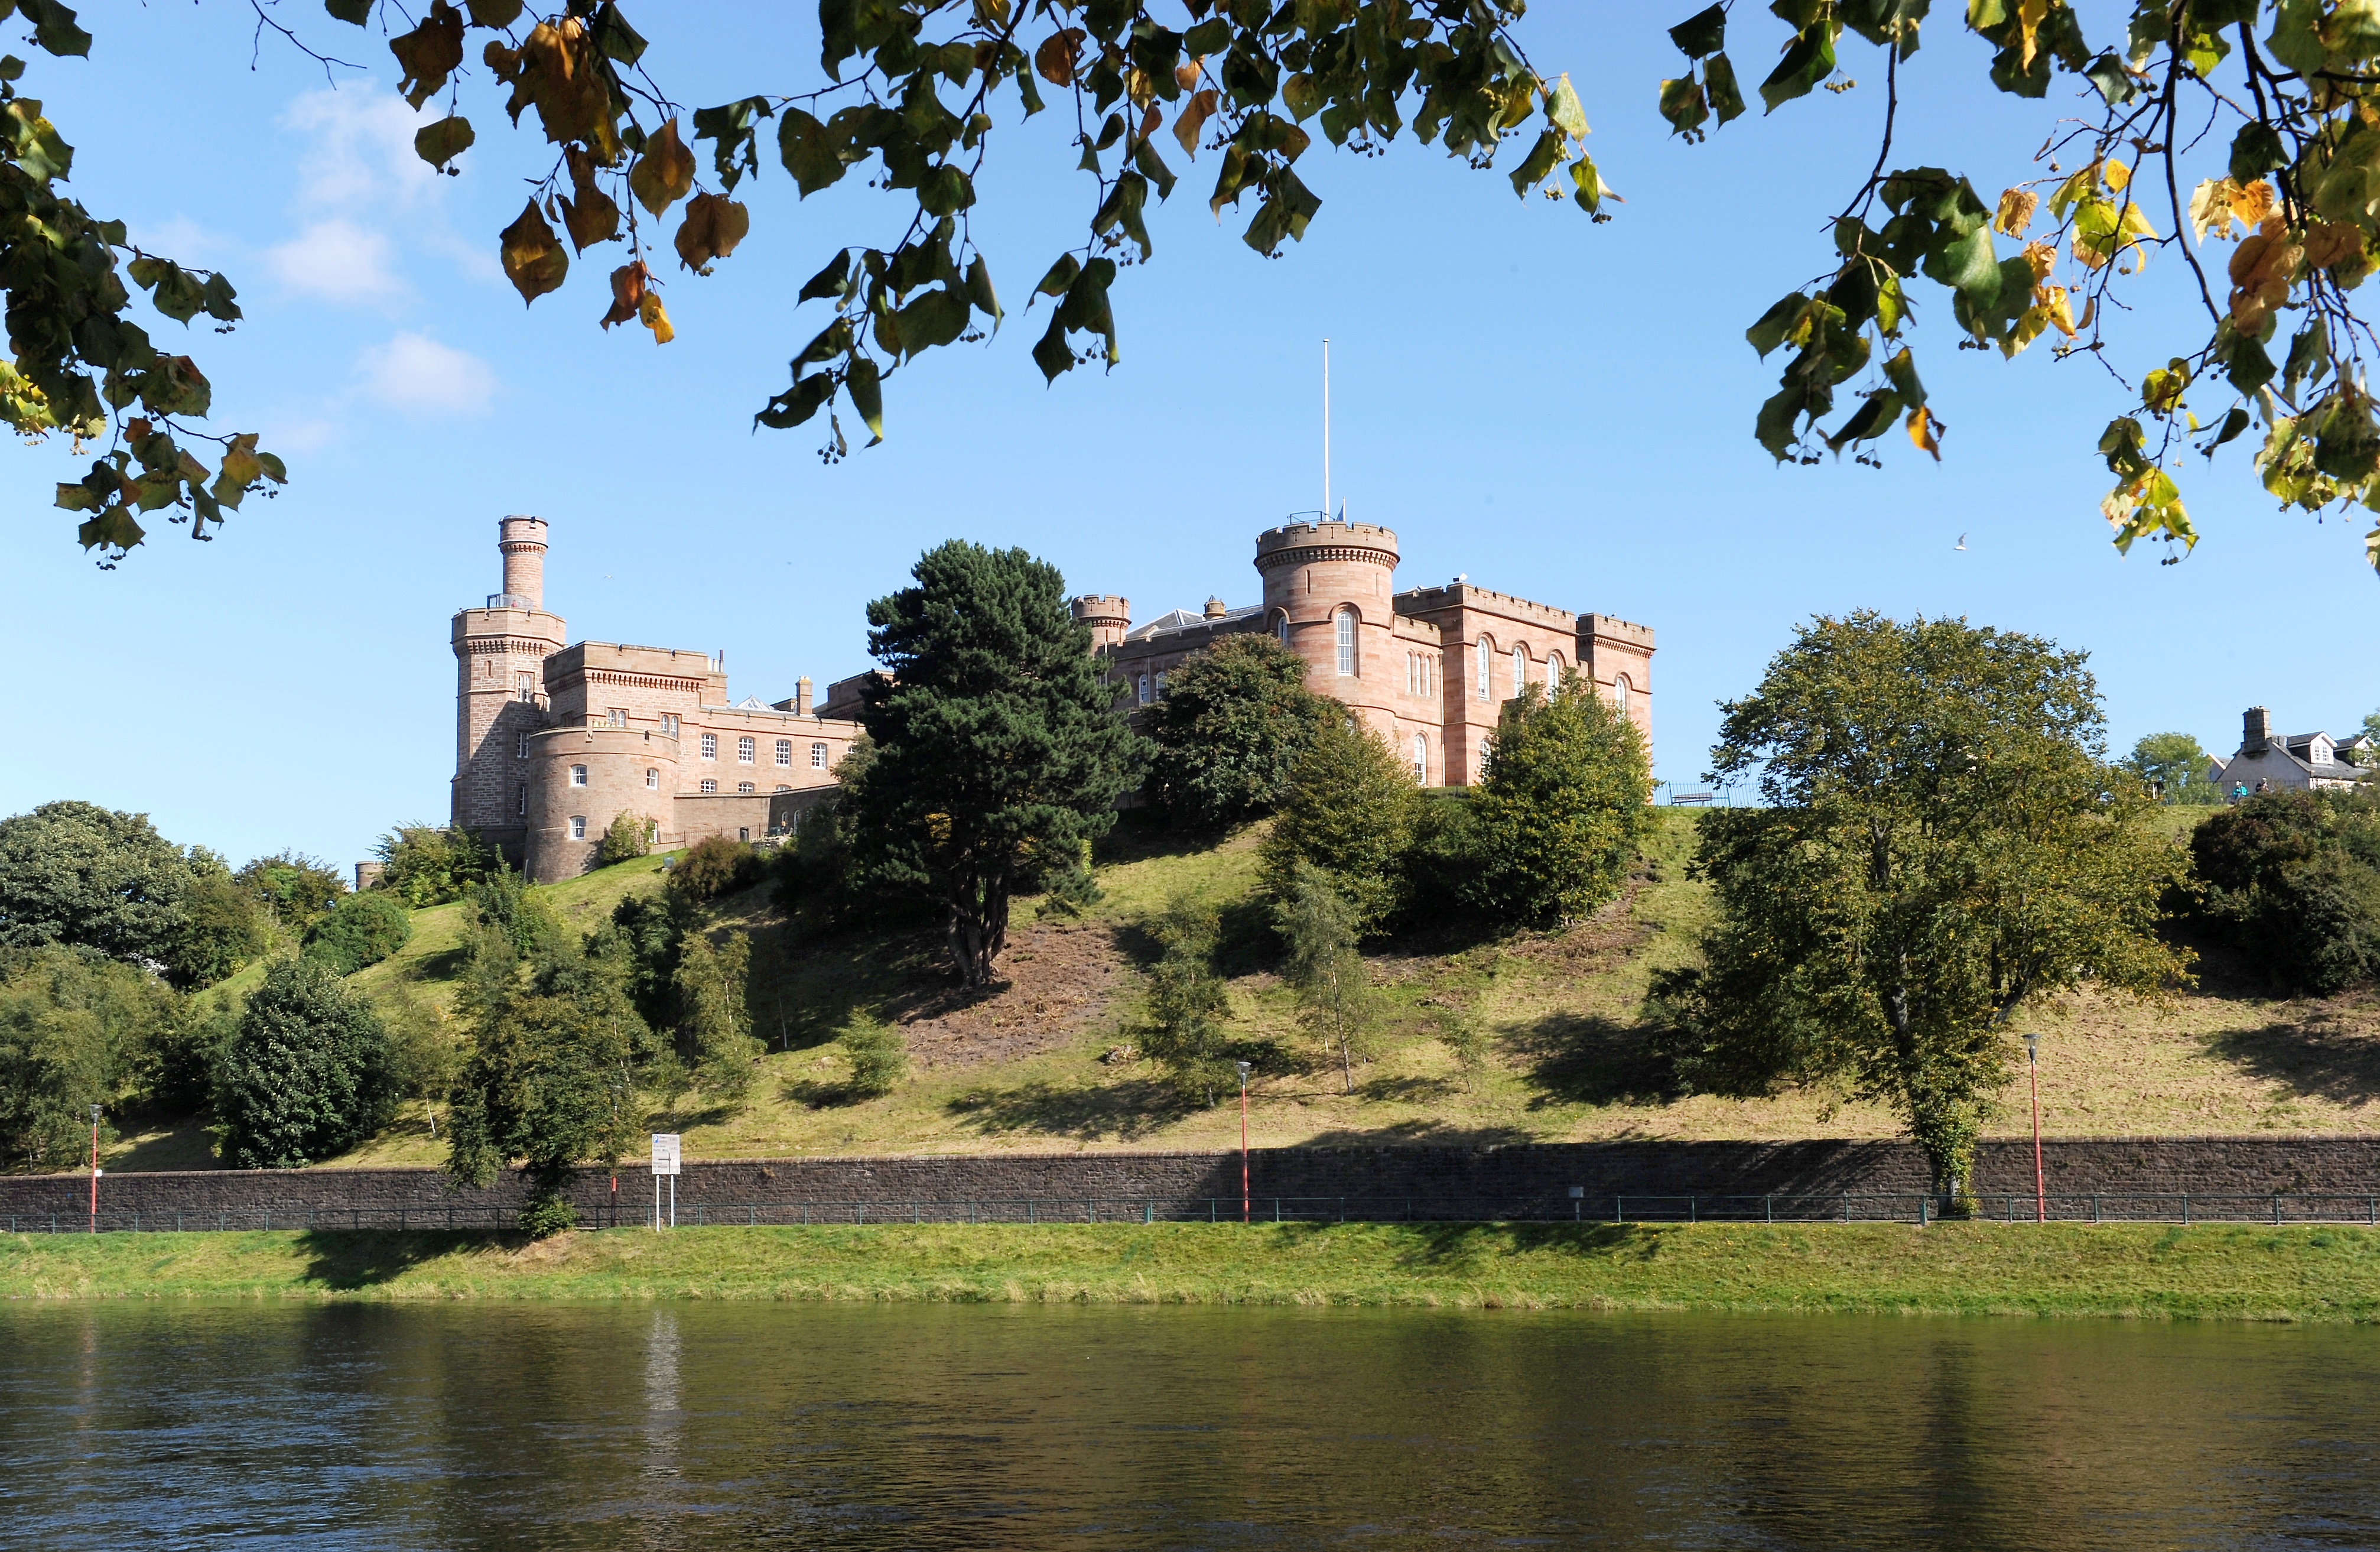 Inverness Castle with the River Ness in the foreground.